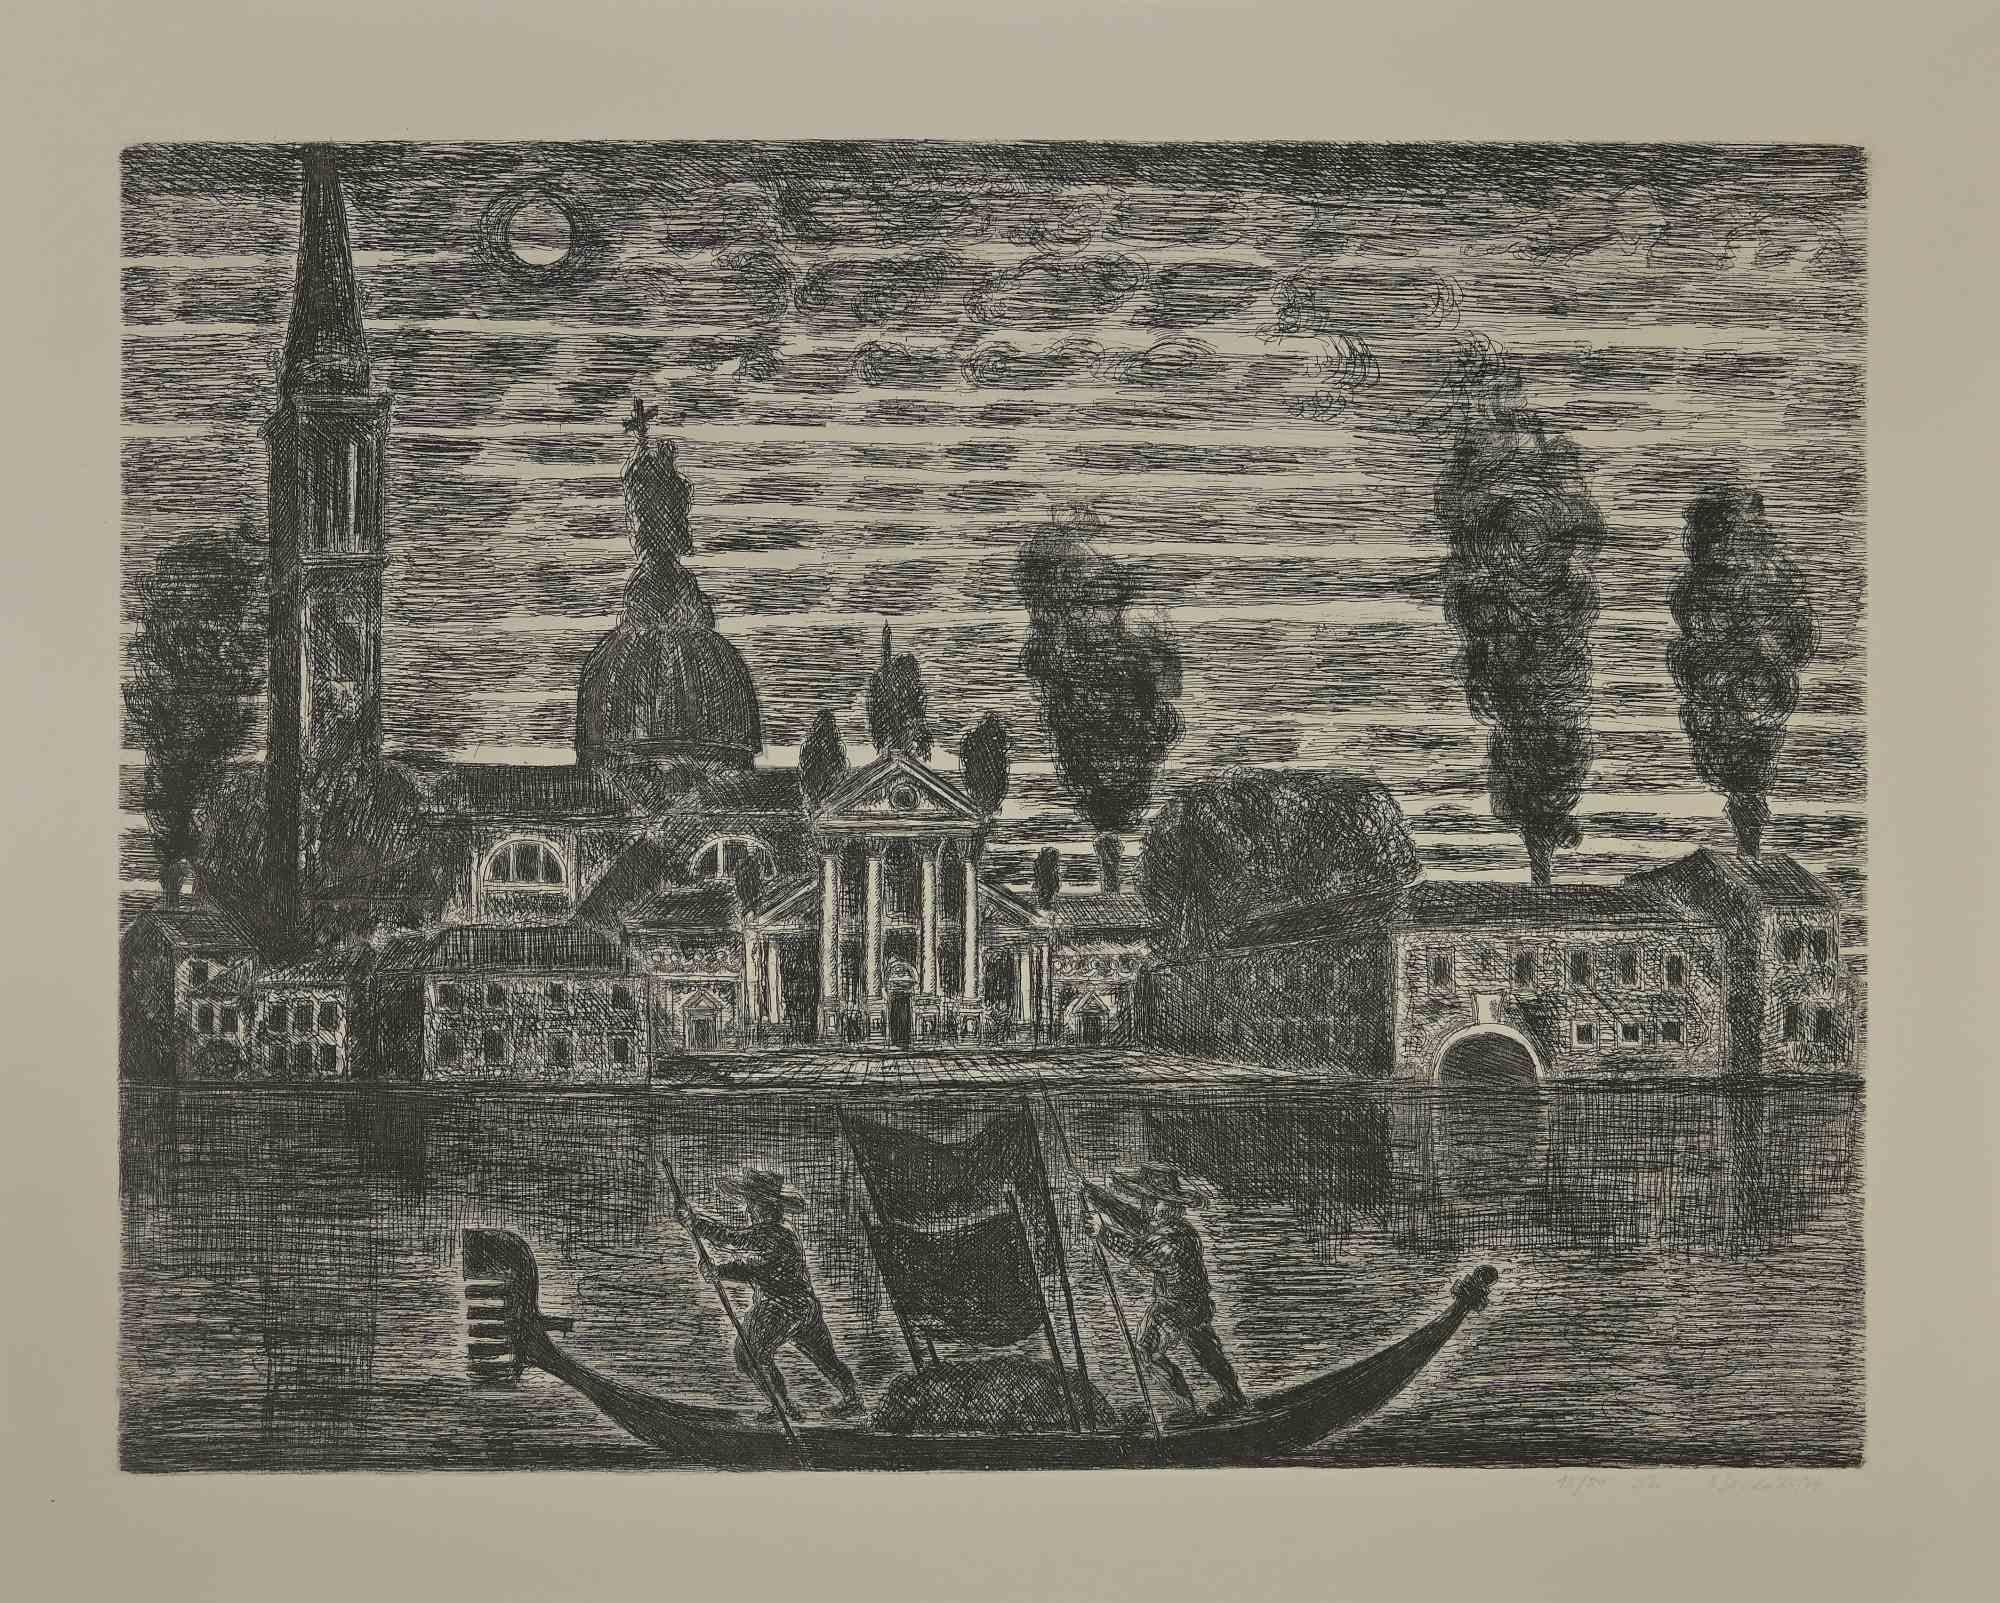 Gondoliers in Venice is an etching realized by Gianpaolo Berto in 1974.

60 X 75 cm , no frame.

Edition 15/50. Numbered and firmed by the artist in the lower margin.

Good conditions.

 
Gianpaolo Berto (1940) was born and raised in the